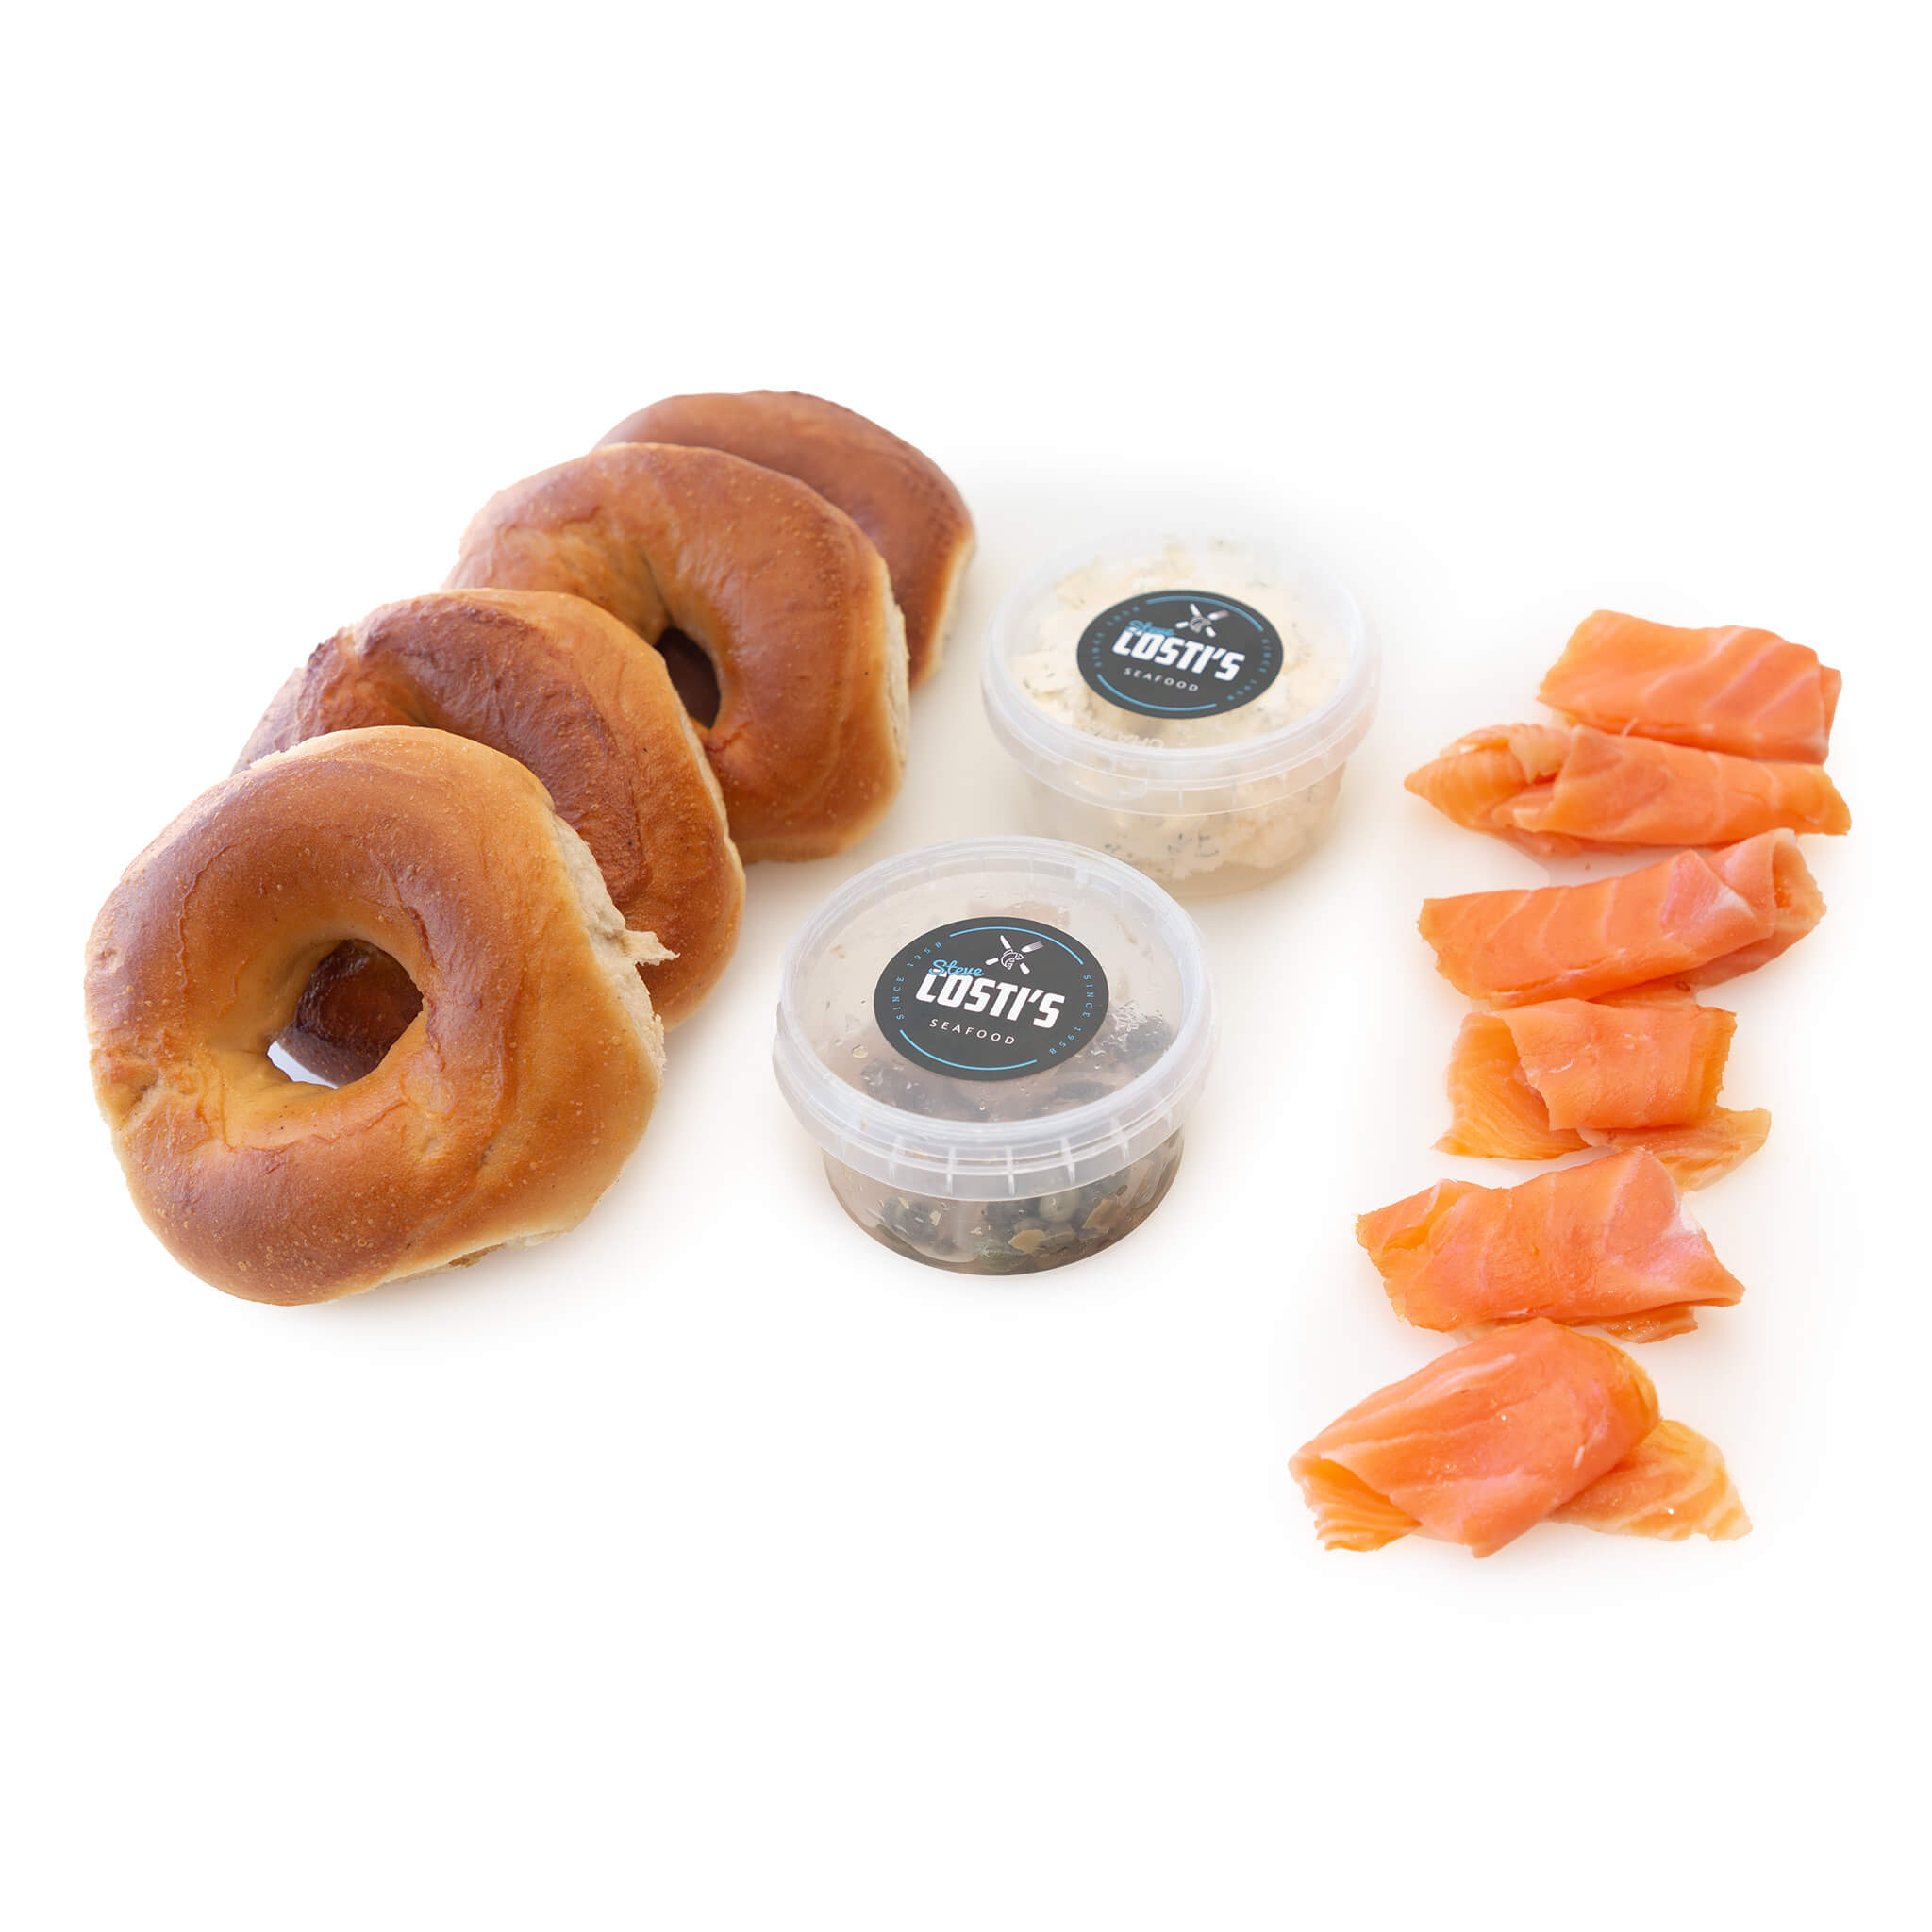 Salmon Bagel Box from steve costi seafood with Smoked Salmon, cream cheese, capers, and pickled onions